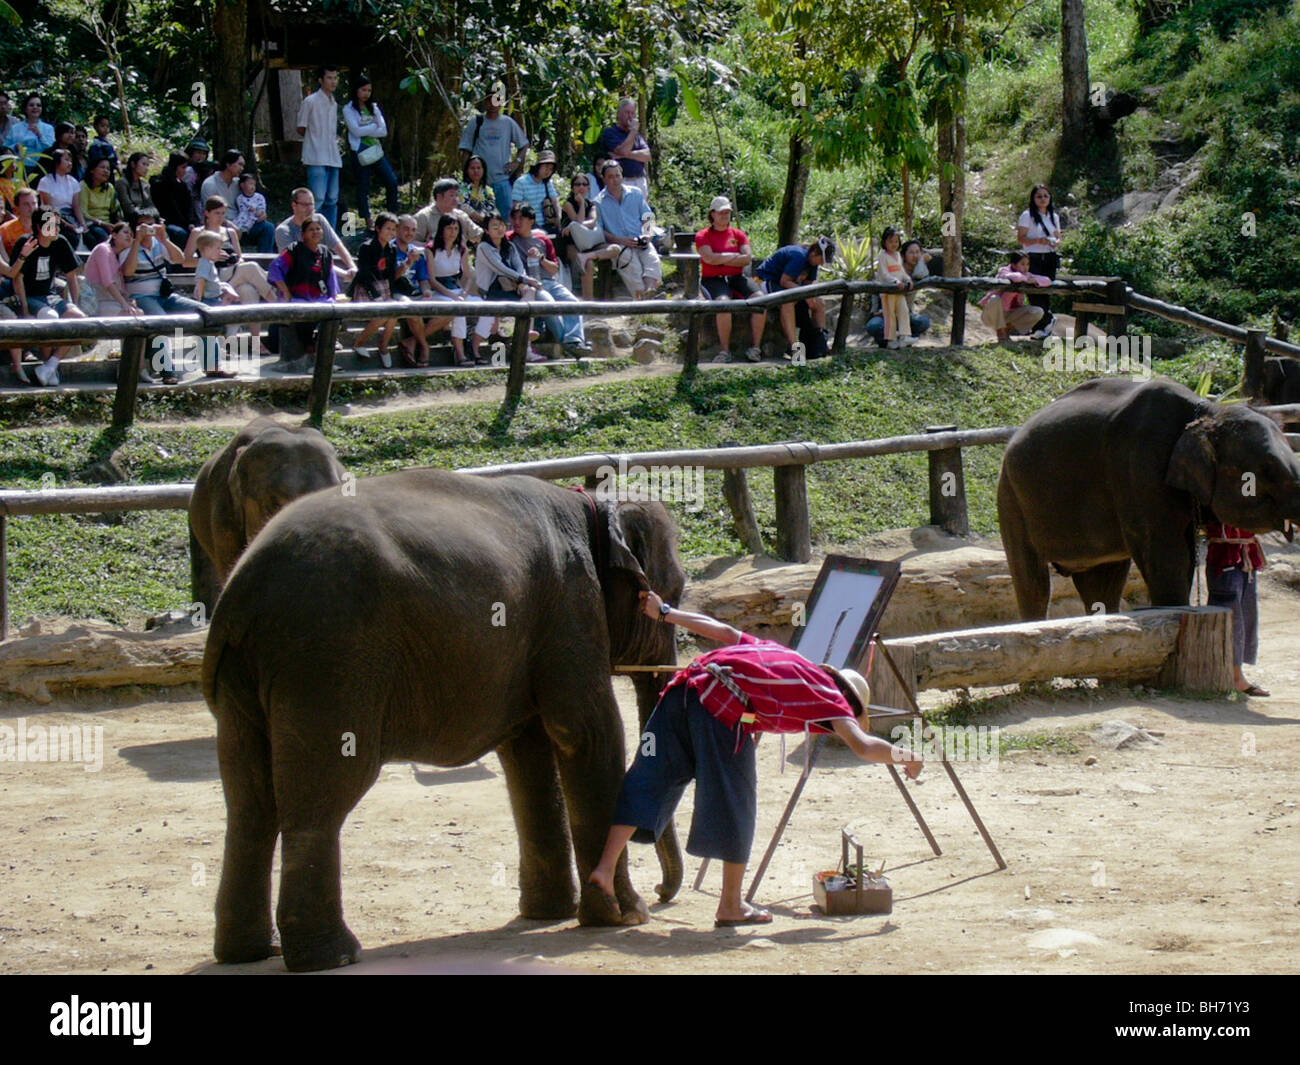 Beach, Thailand, Crowd Tourists Watching Show Of Trained Elephants Painting on Canvases Stock Photo